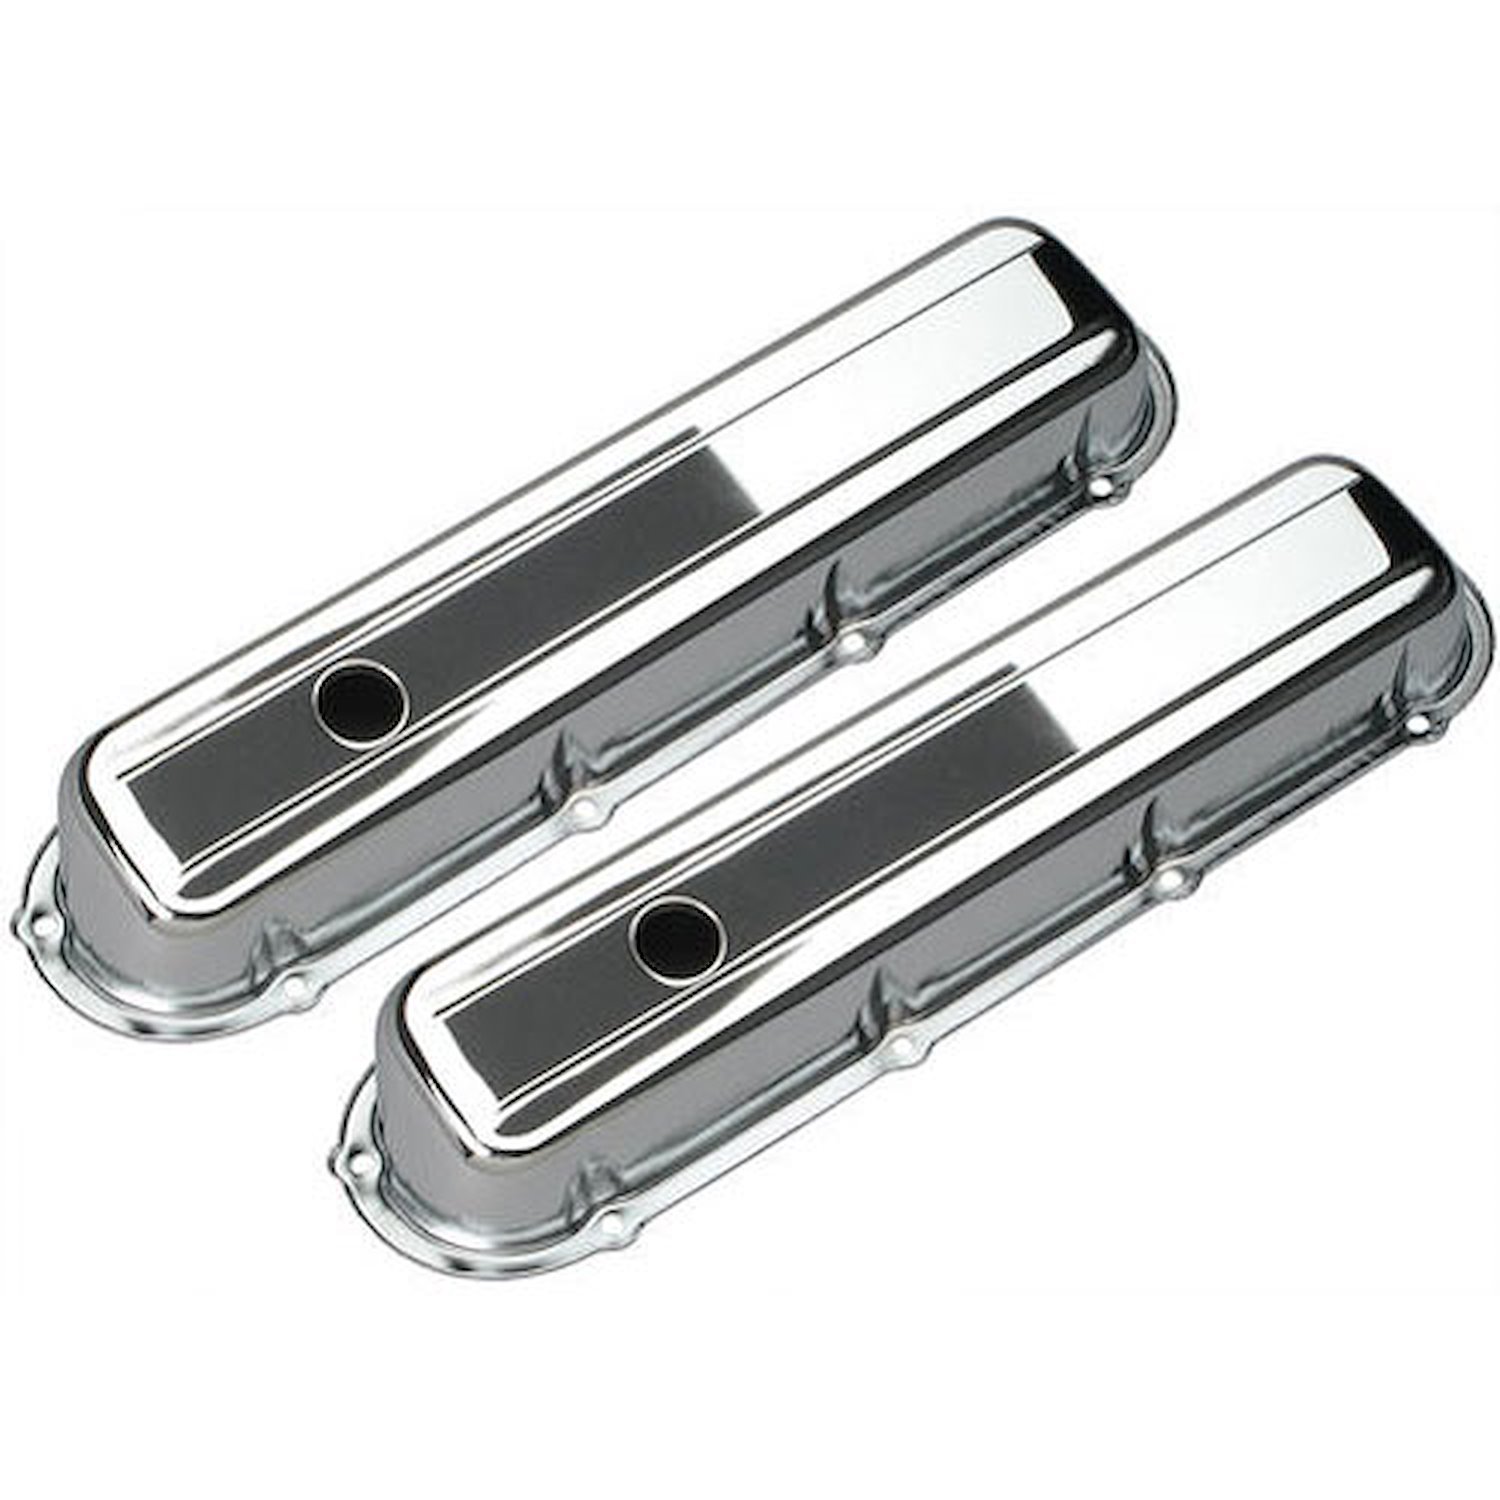 Chrome Plated Steel Valve Covers 1977-1979 Cadillac 425 V8